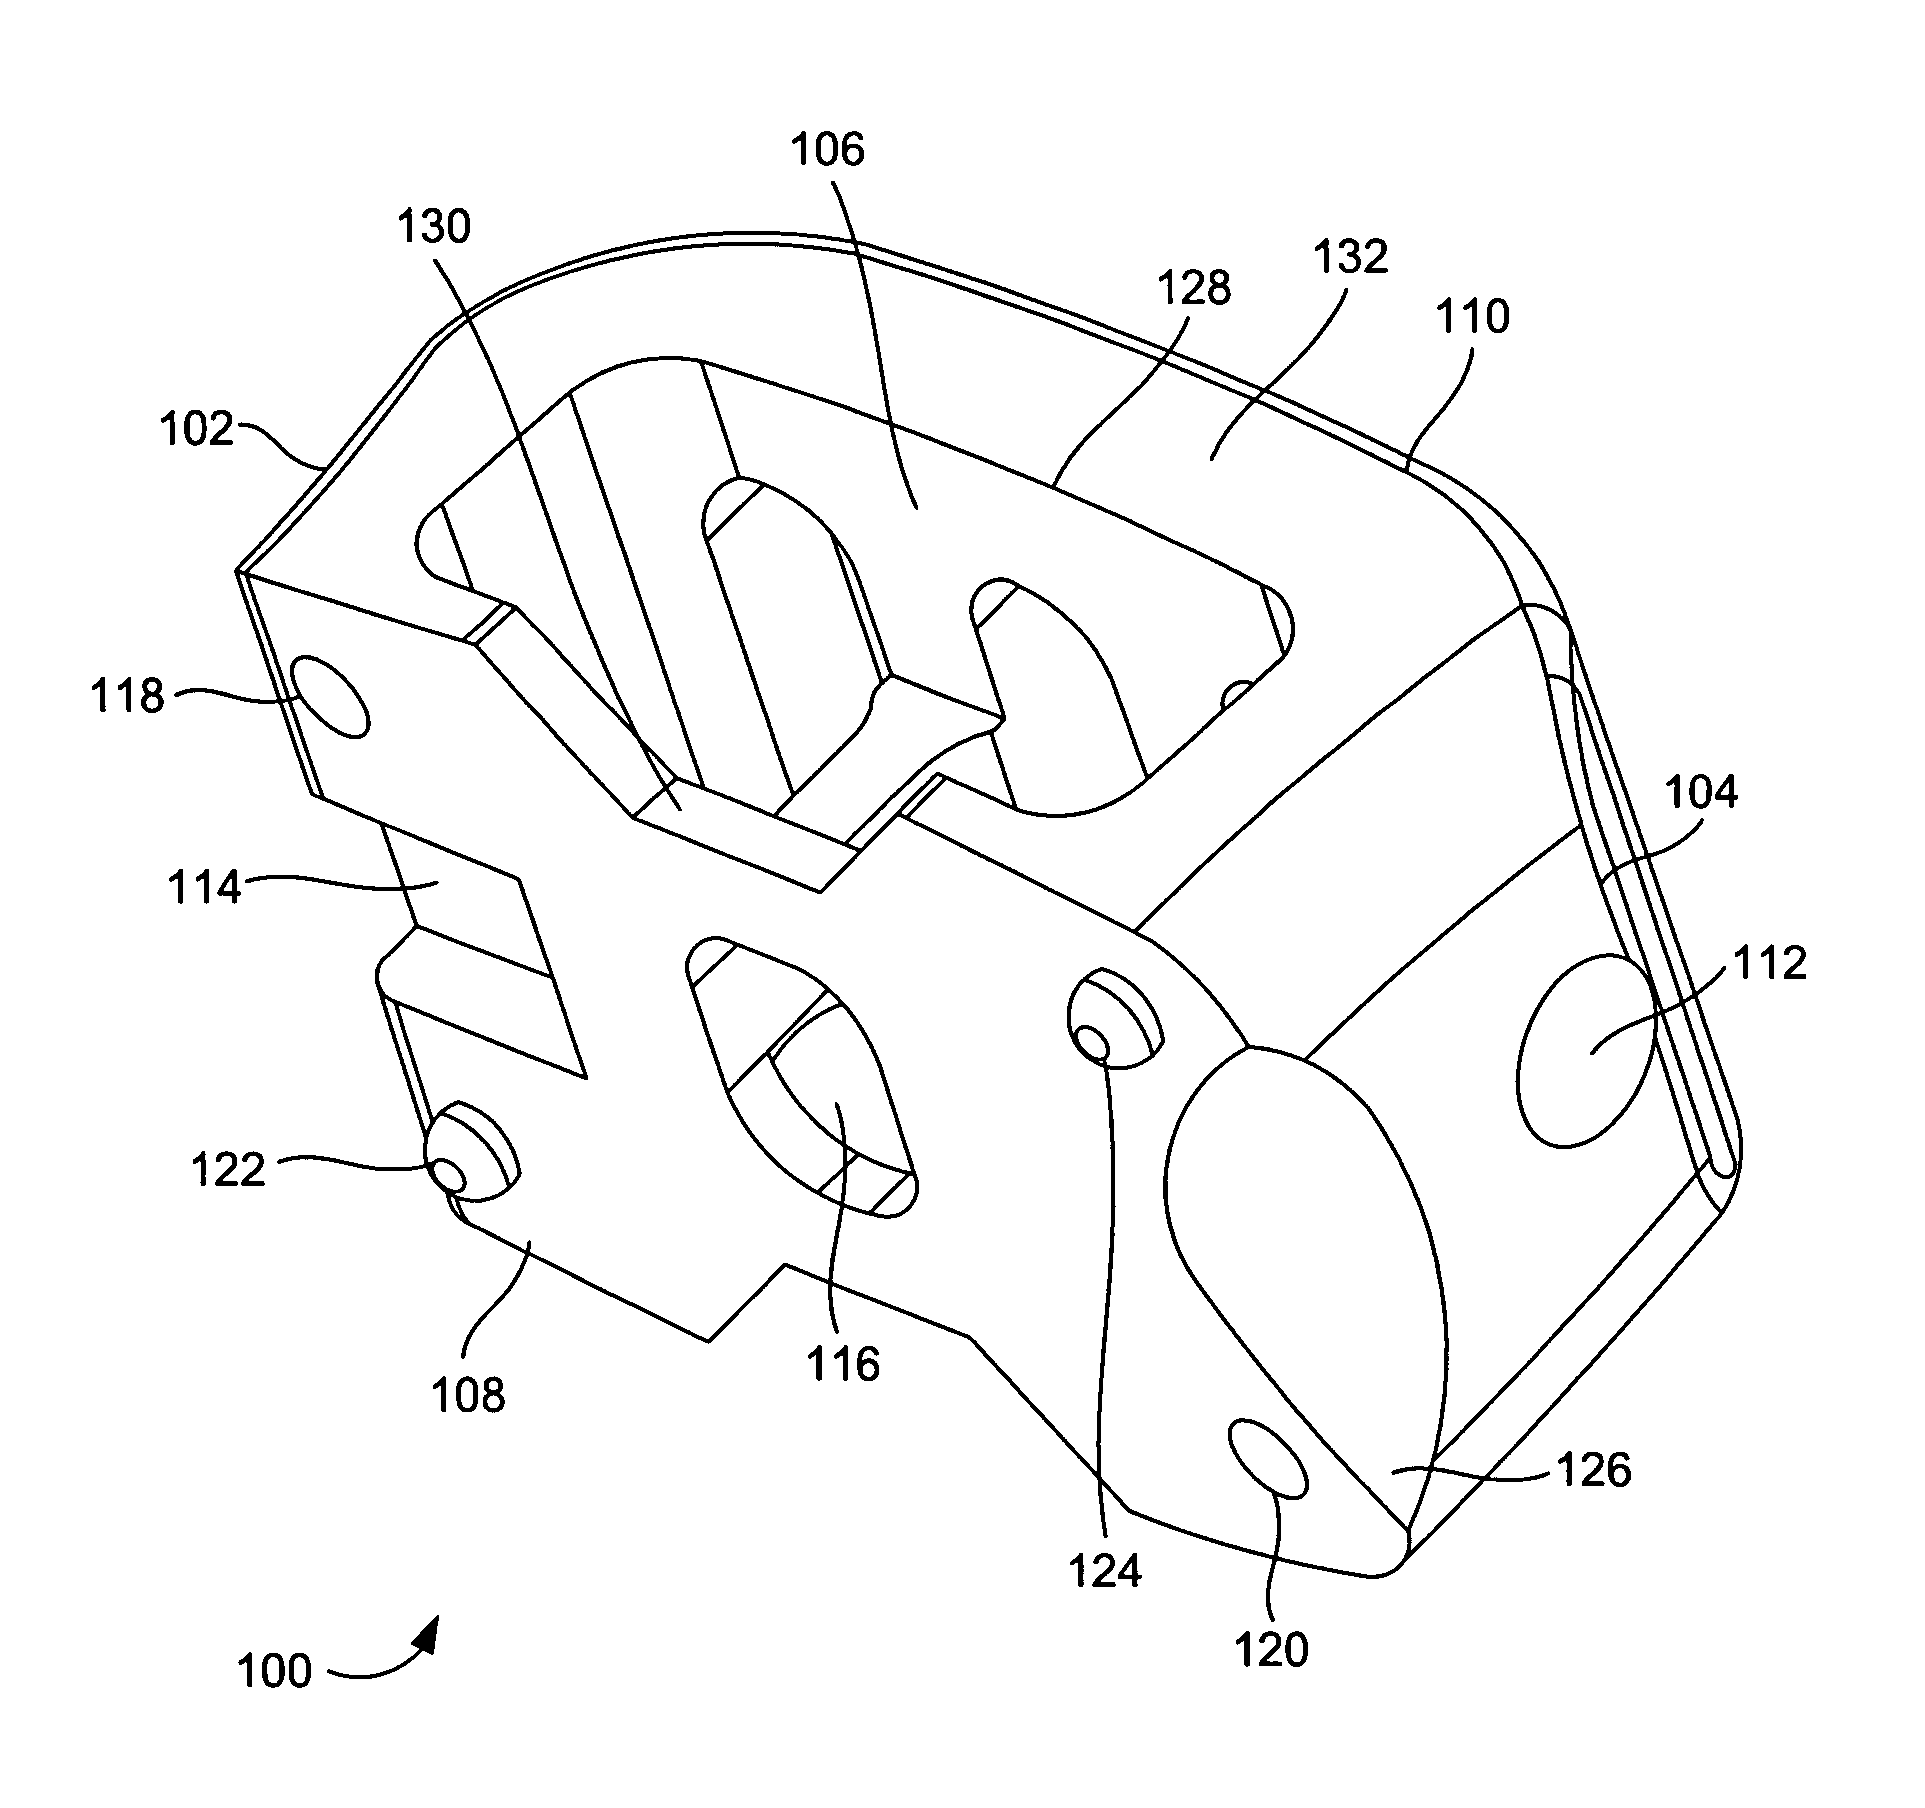 Modular lateral expansion device